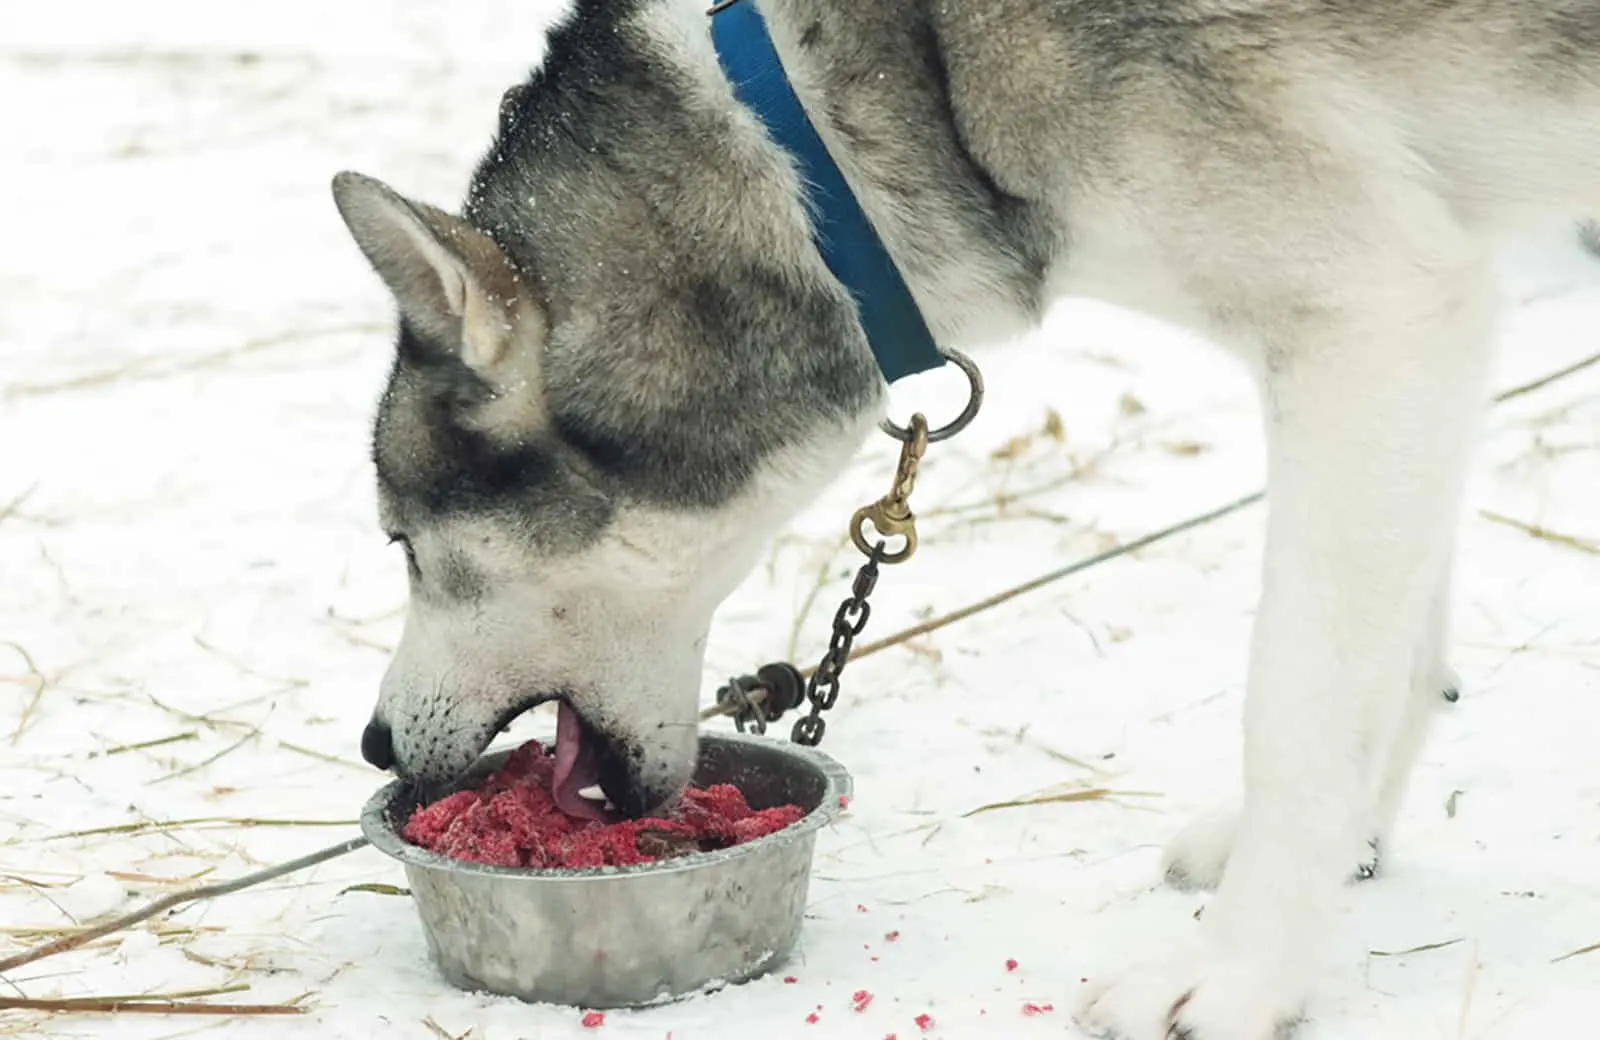 husky eating minced meat from a bowl